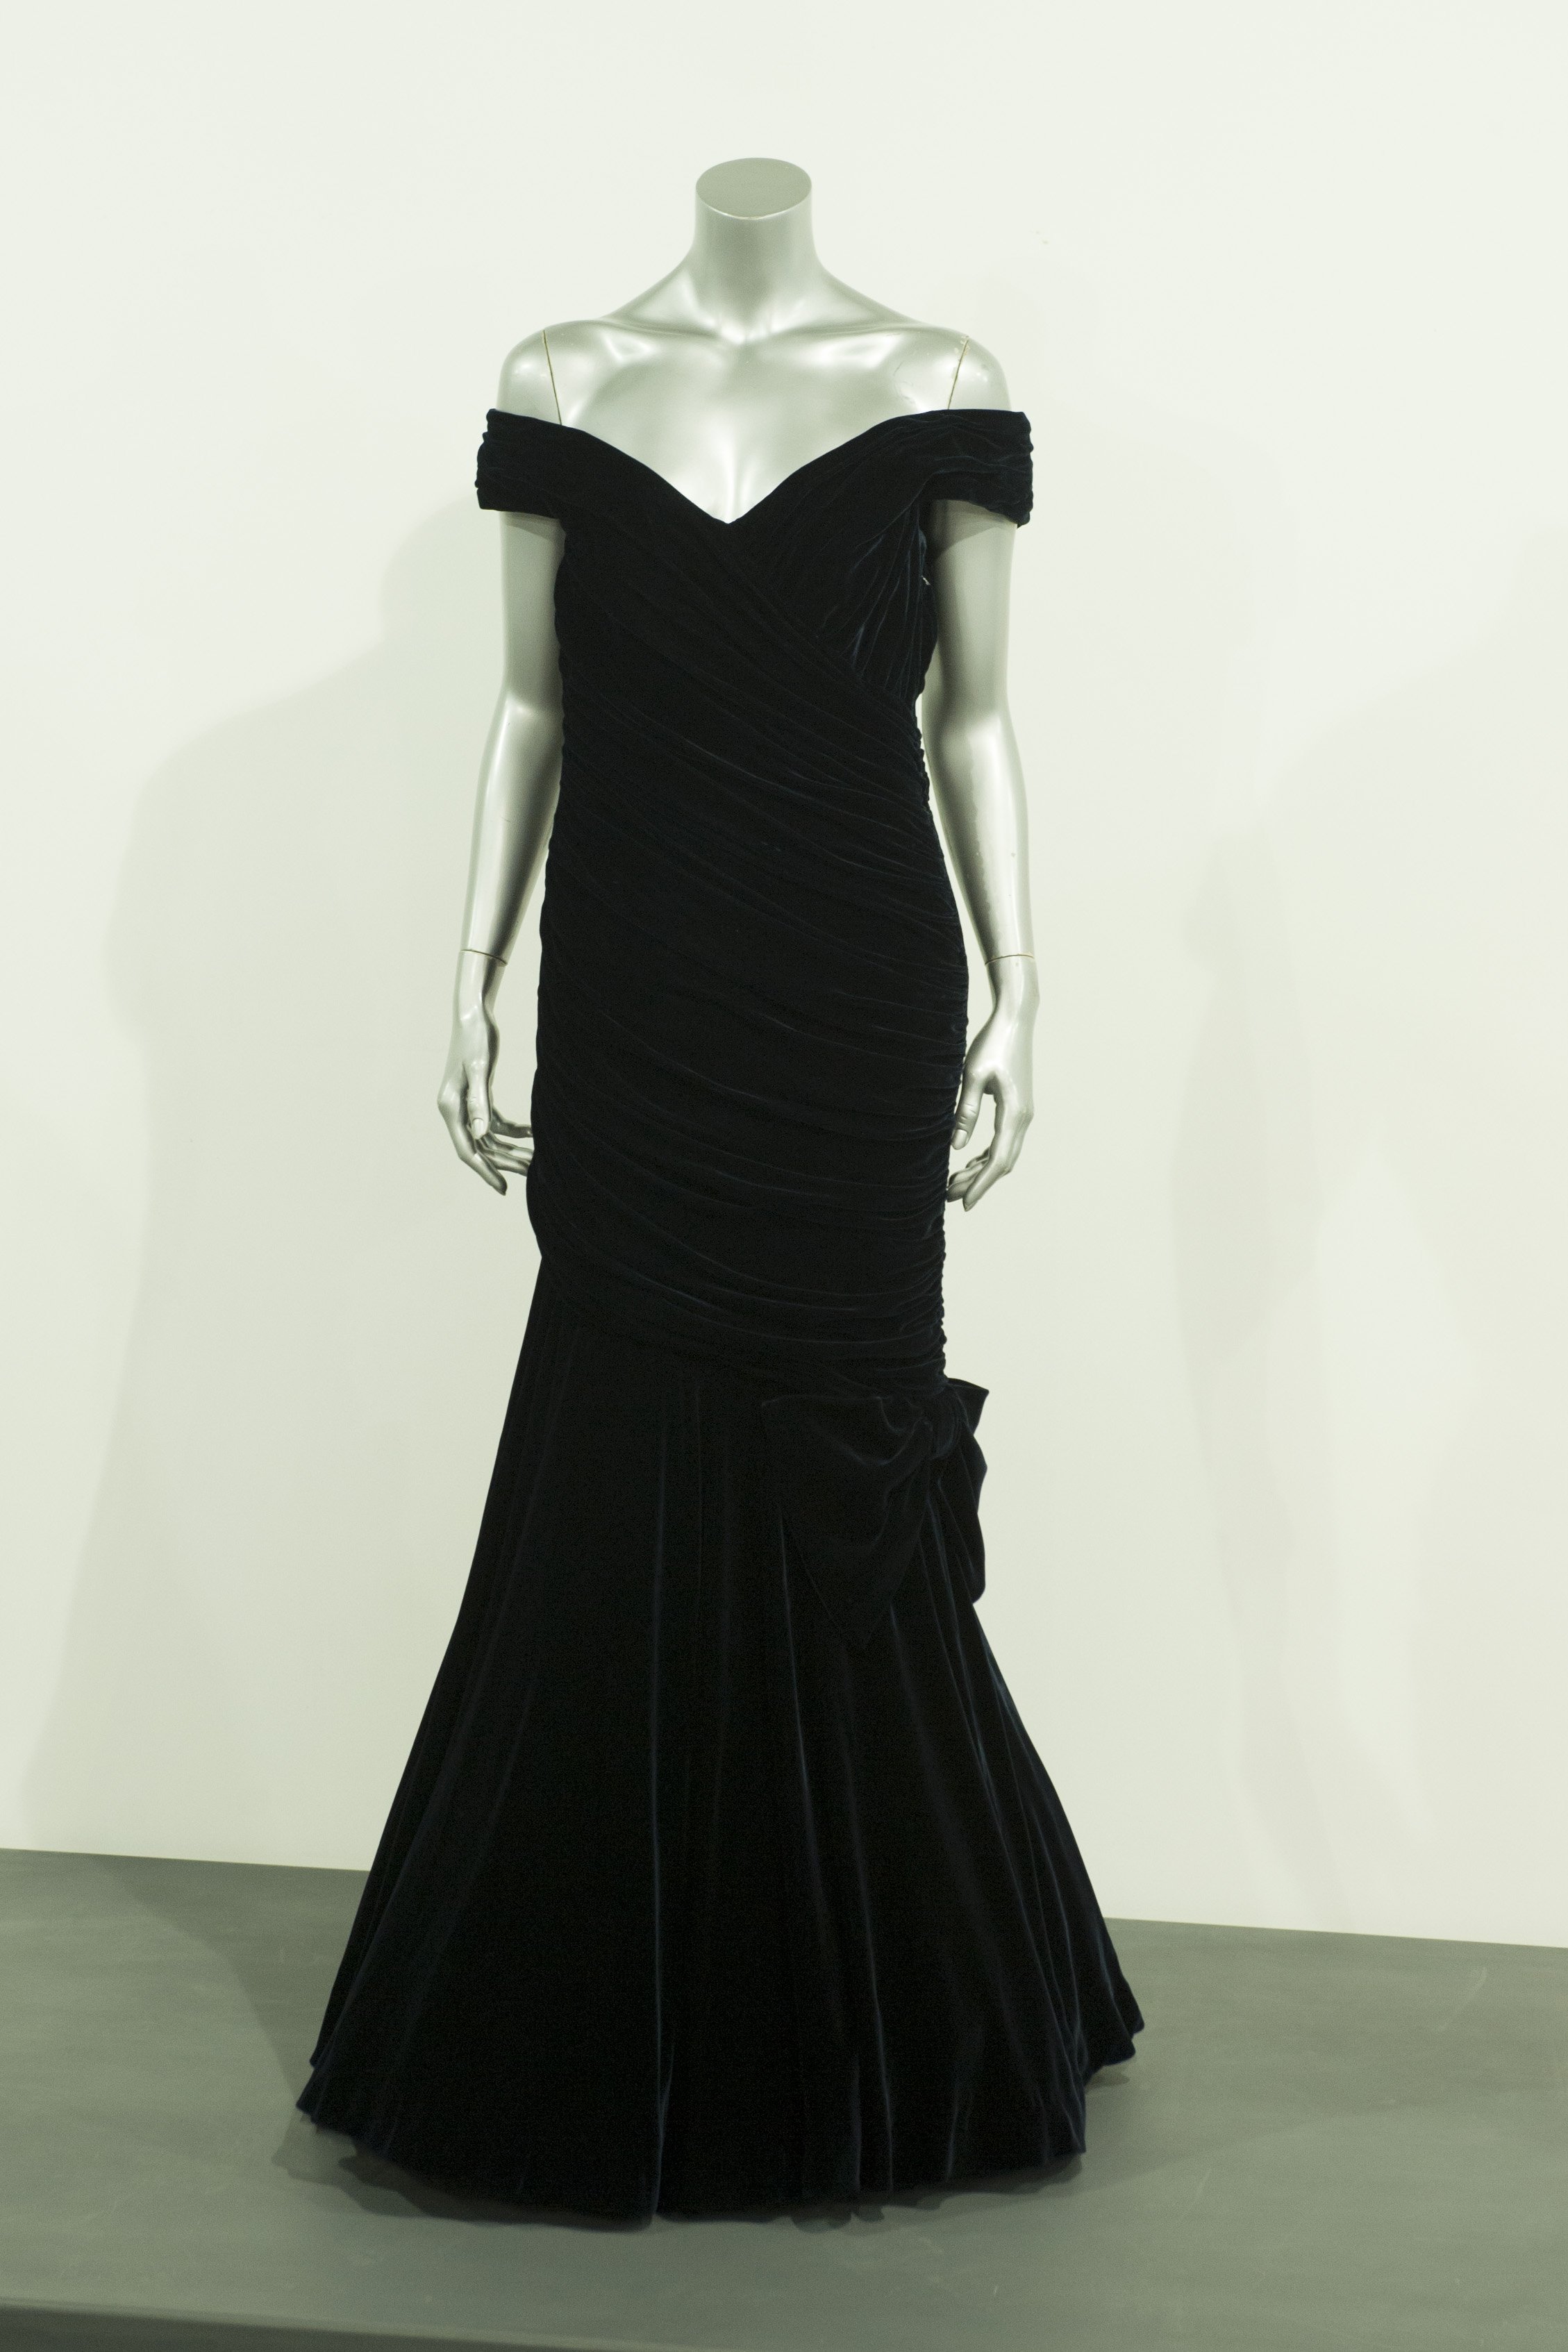 Victor Edelstein Midnight Blue Velvet Gown worn by Princess Diana in November 1985  displayed at a photocall for the 'Fit For a Princess' auction on March 15, 2013, in London, England | Photo: Simon Burchell/Getty Images